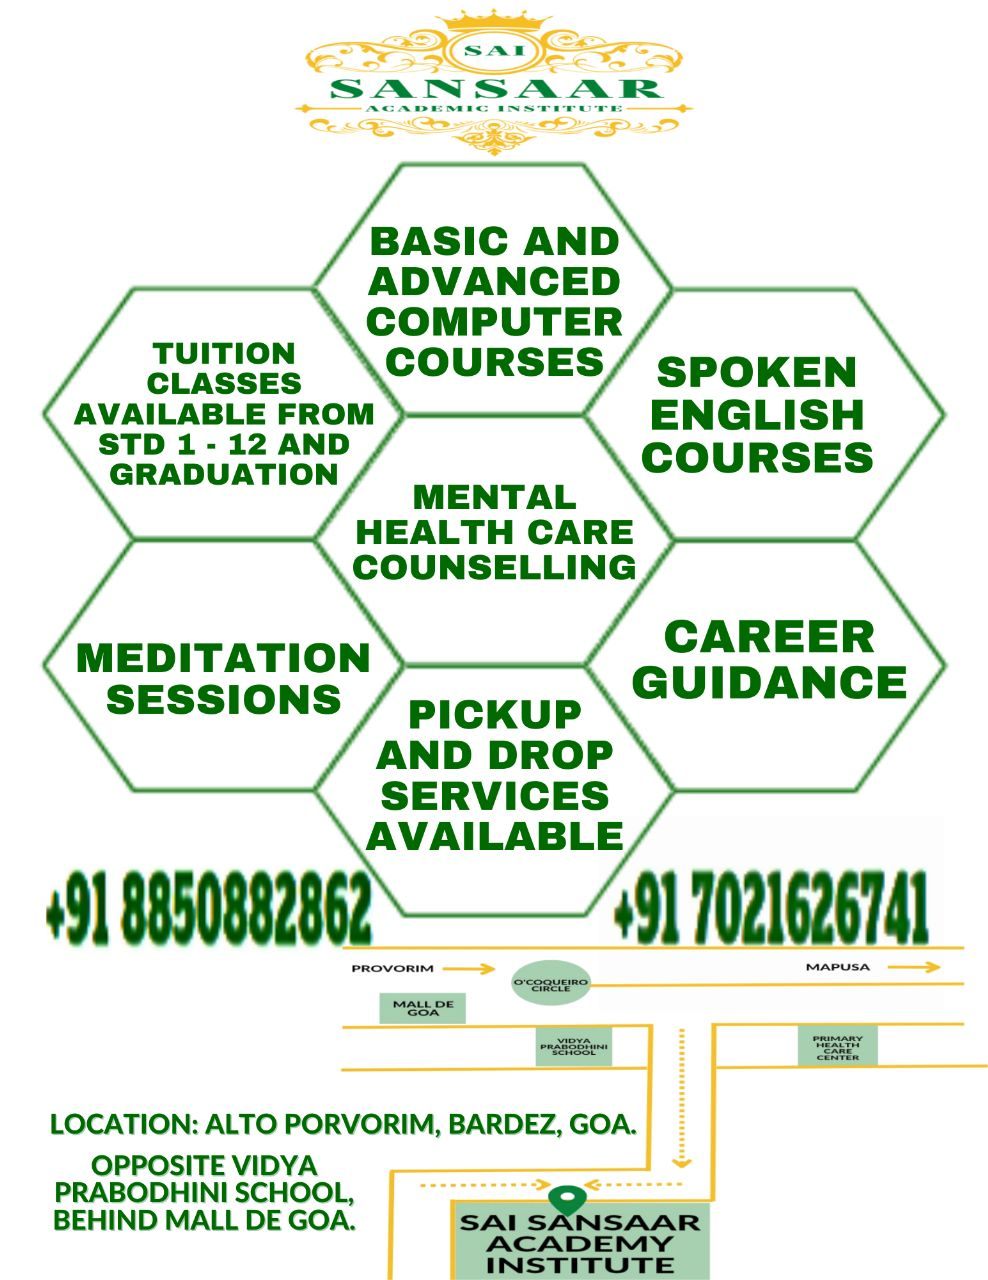 Sansaar Academy Institute - tuition classes, computer and spoken English courses